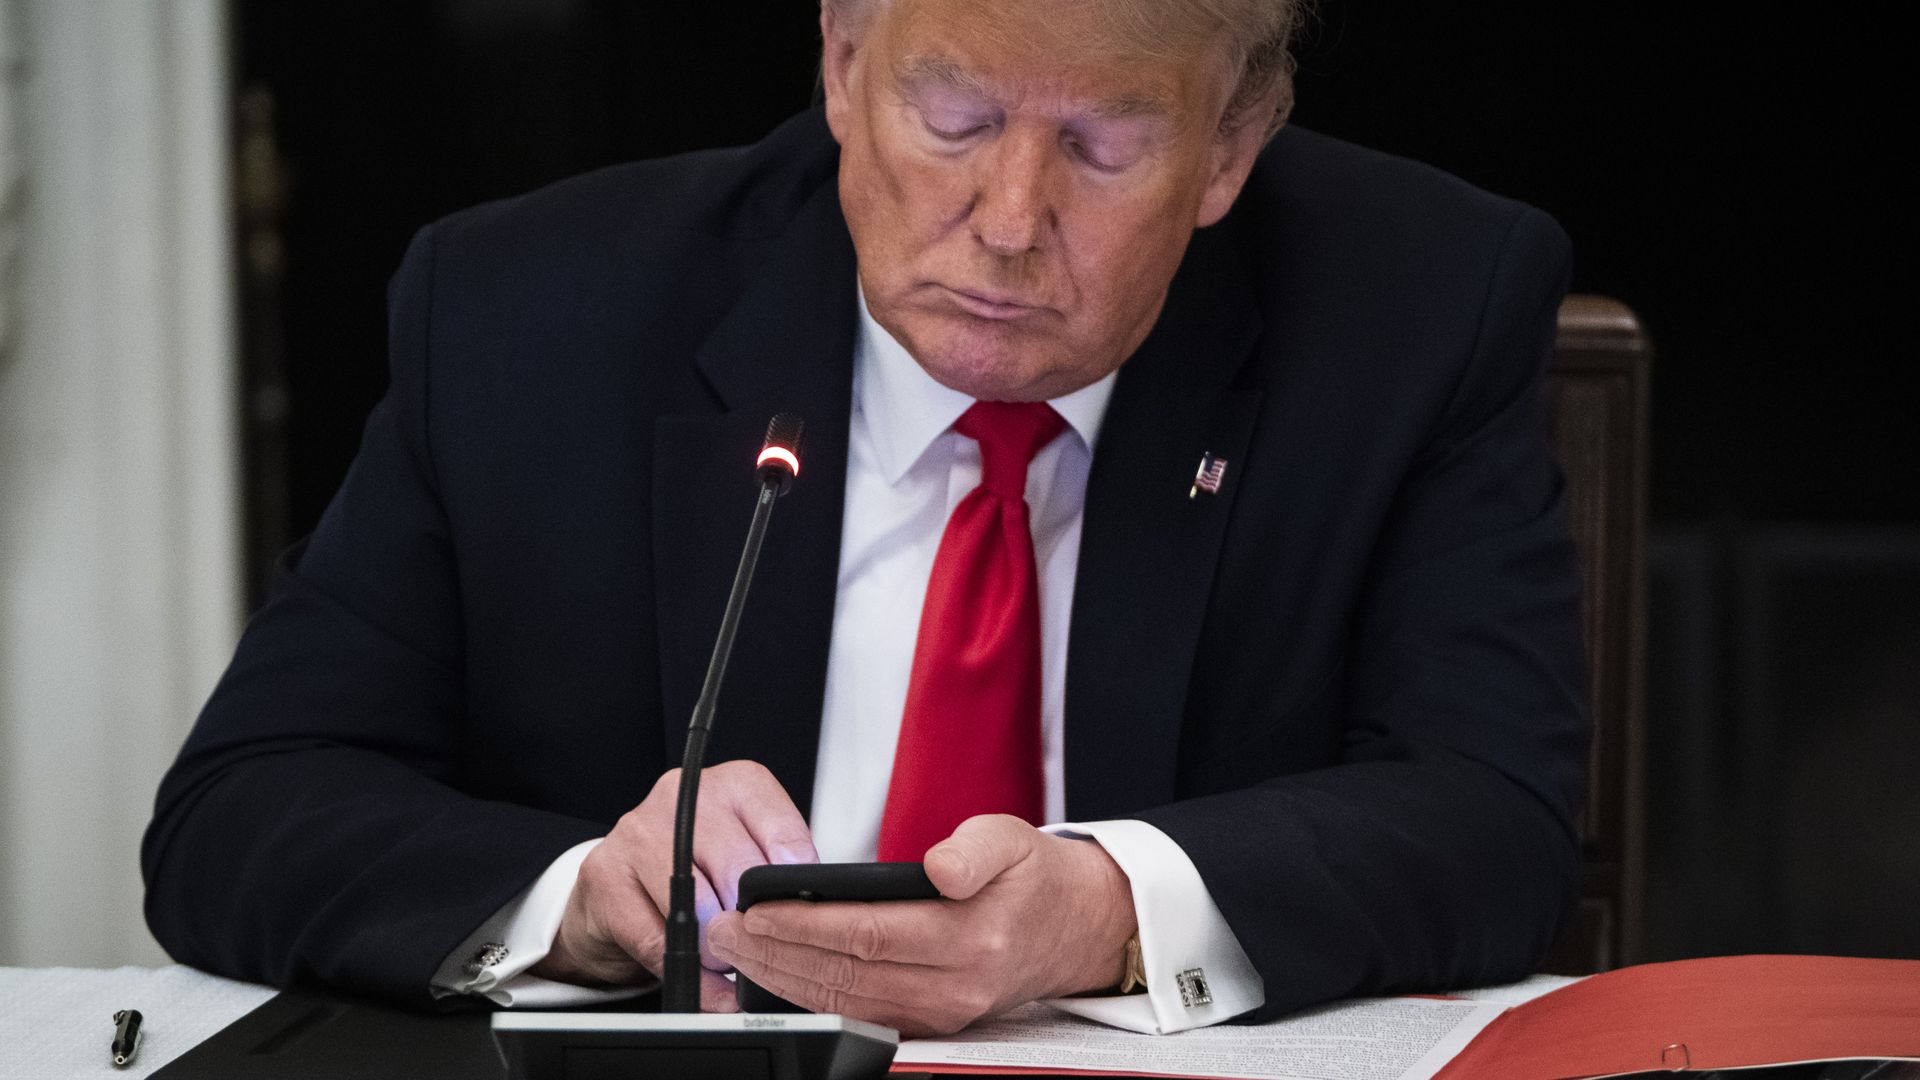 President Trump on his cellphone in June.